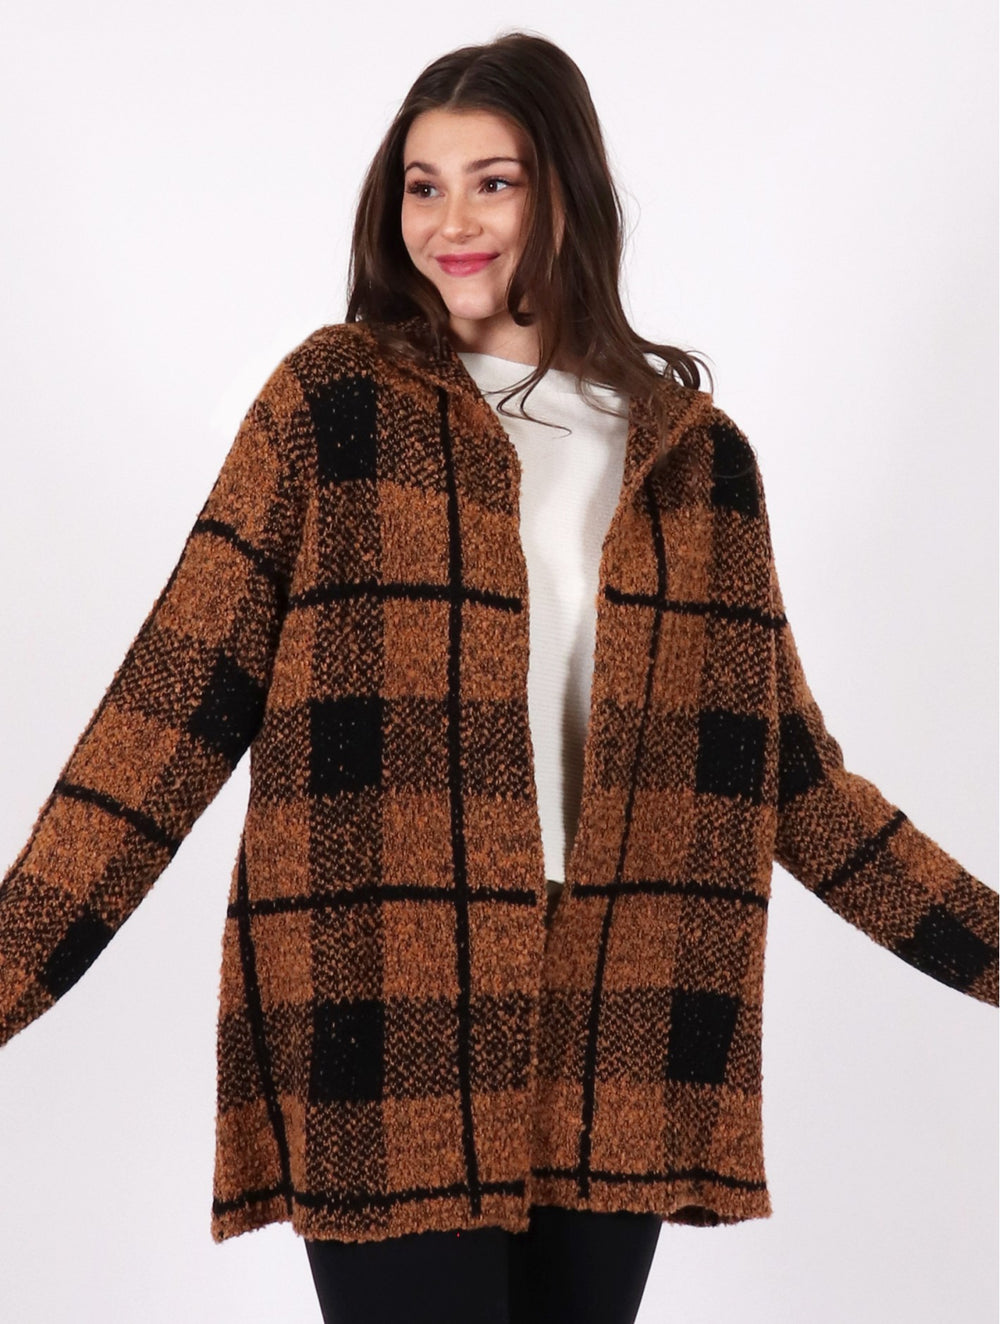 Grand-Soft, Knitted, Buttoned Jacket Camel and Black Check (CL0181)